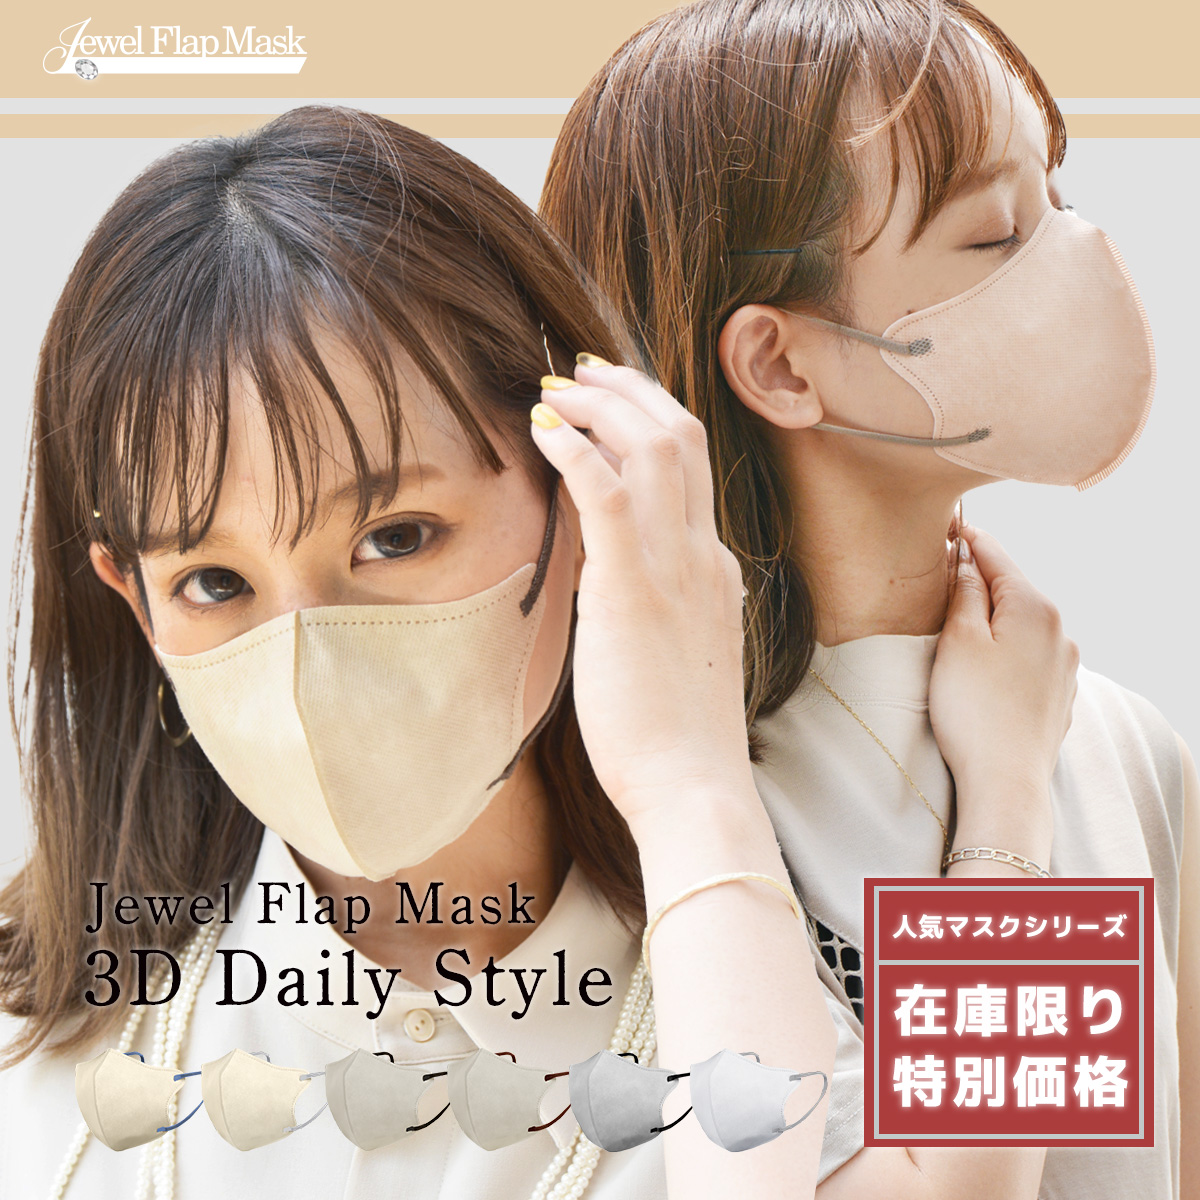 | limited amount! special price | 3Dtei Lee style color mask both sides same color 3D solid mask 3 layer structure non-woven mask small face jewel flap mask . color color WEIMALL